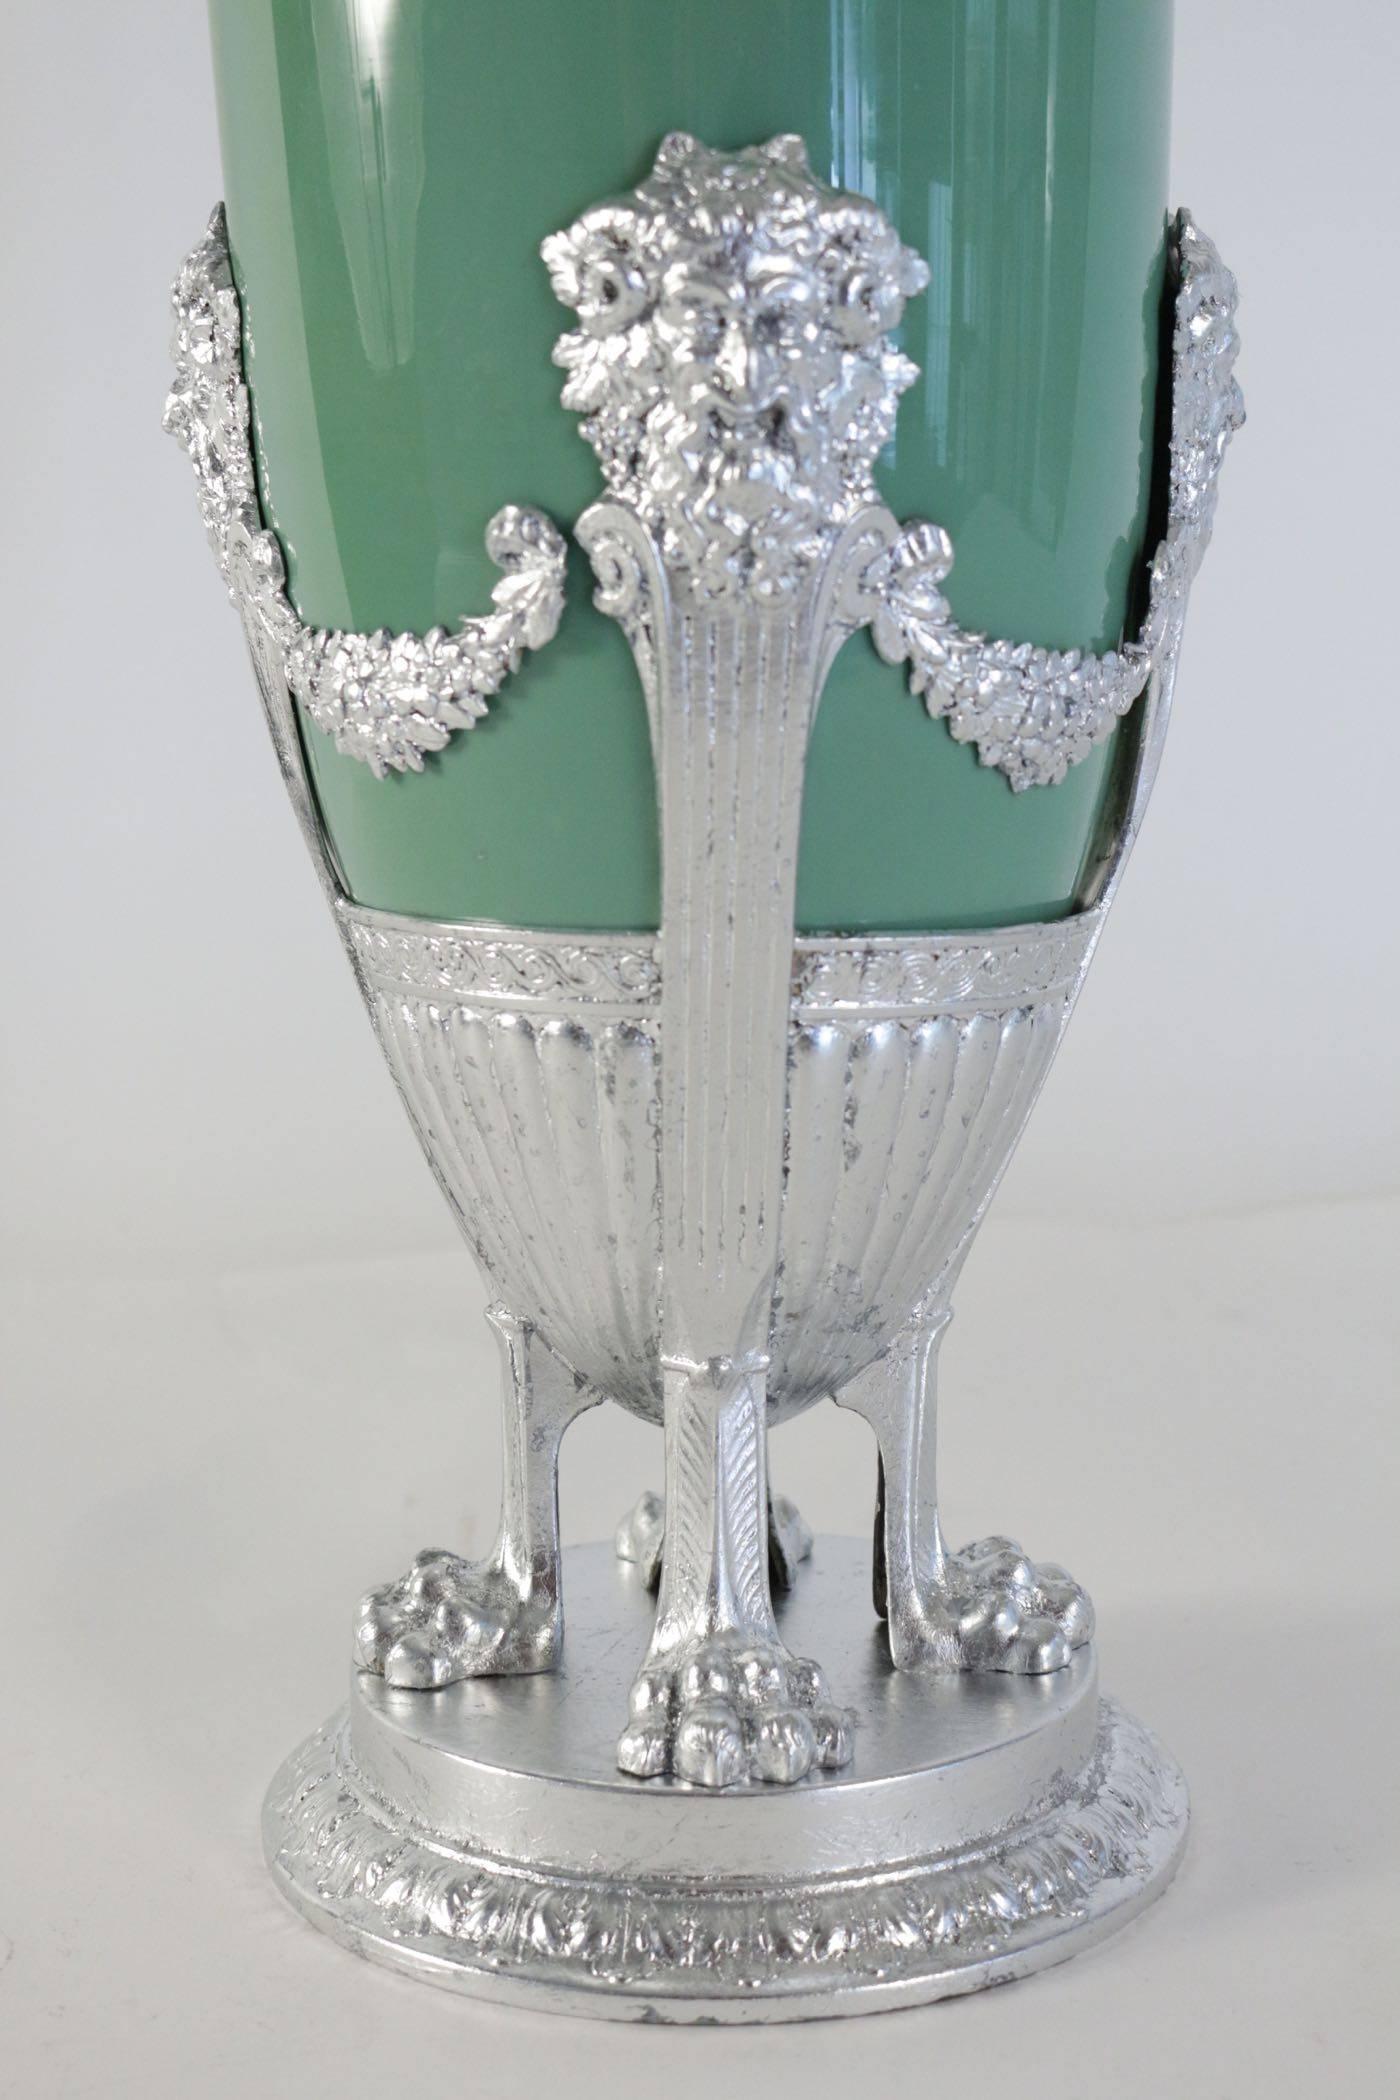 French Celadon Vase in Faience, Silver Plate and Silver Leaf, 19th Century Period